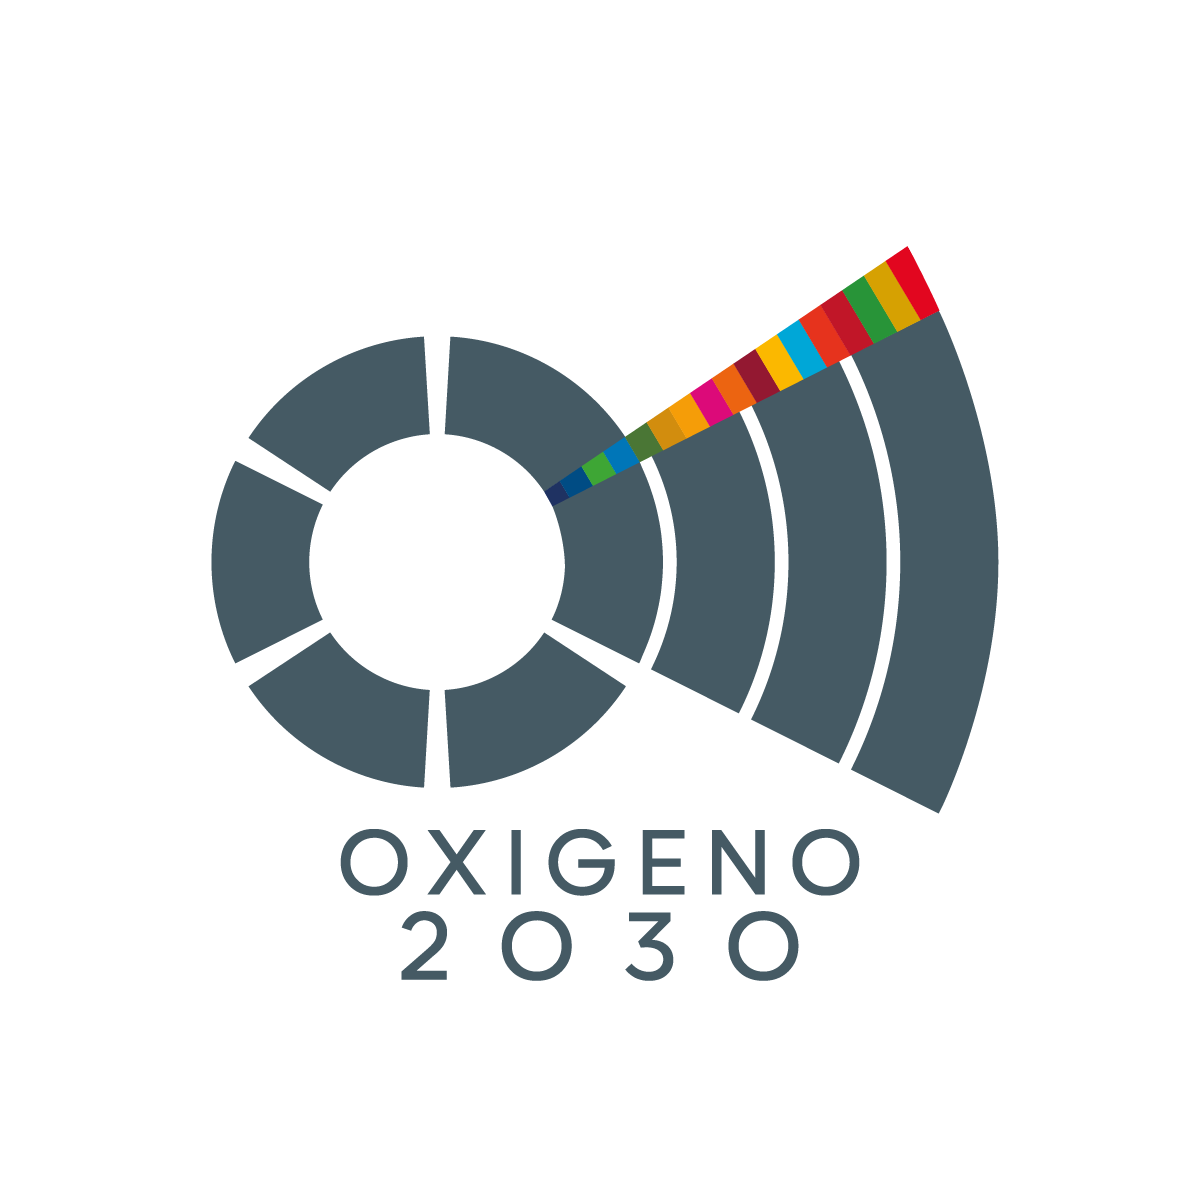 #Oxigeno2030: Tech entrepreneurs to offer free data plans and content to aid the Covid-19 Crisis Relief effort in Mexico